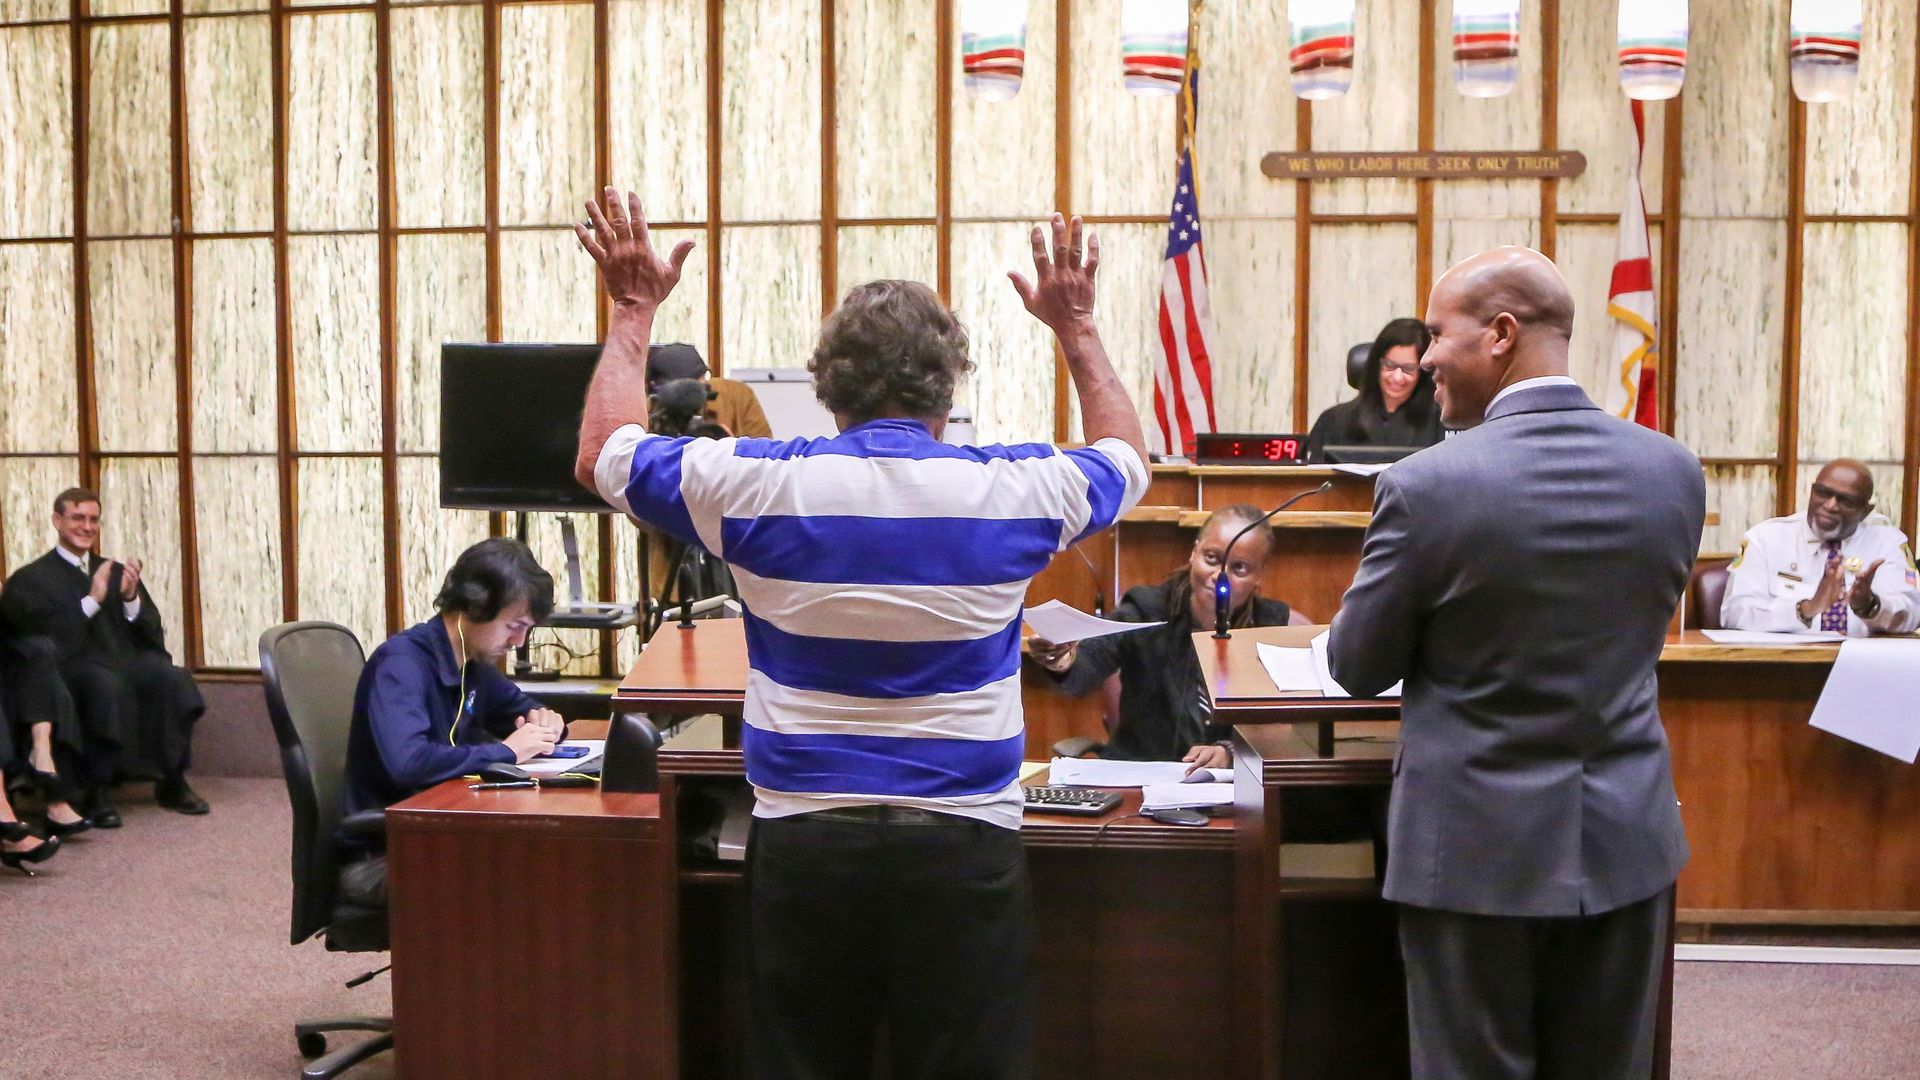 In this image, a person in a courtroom raises their hands